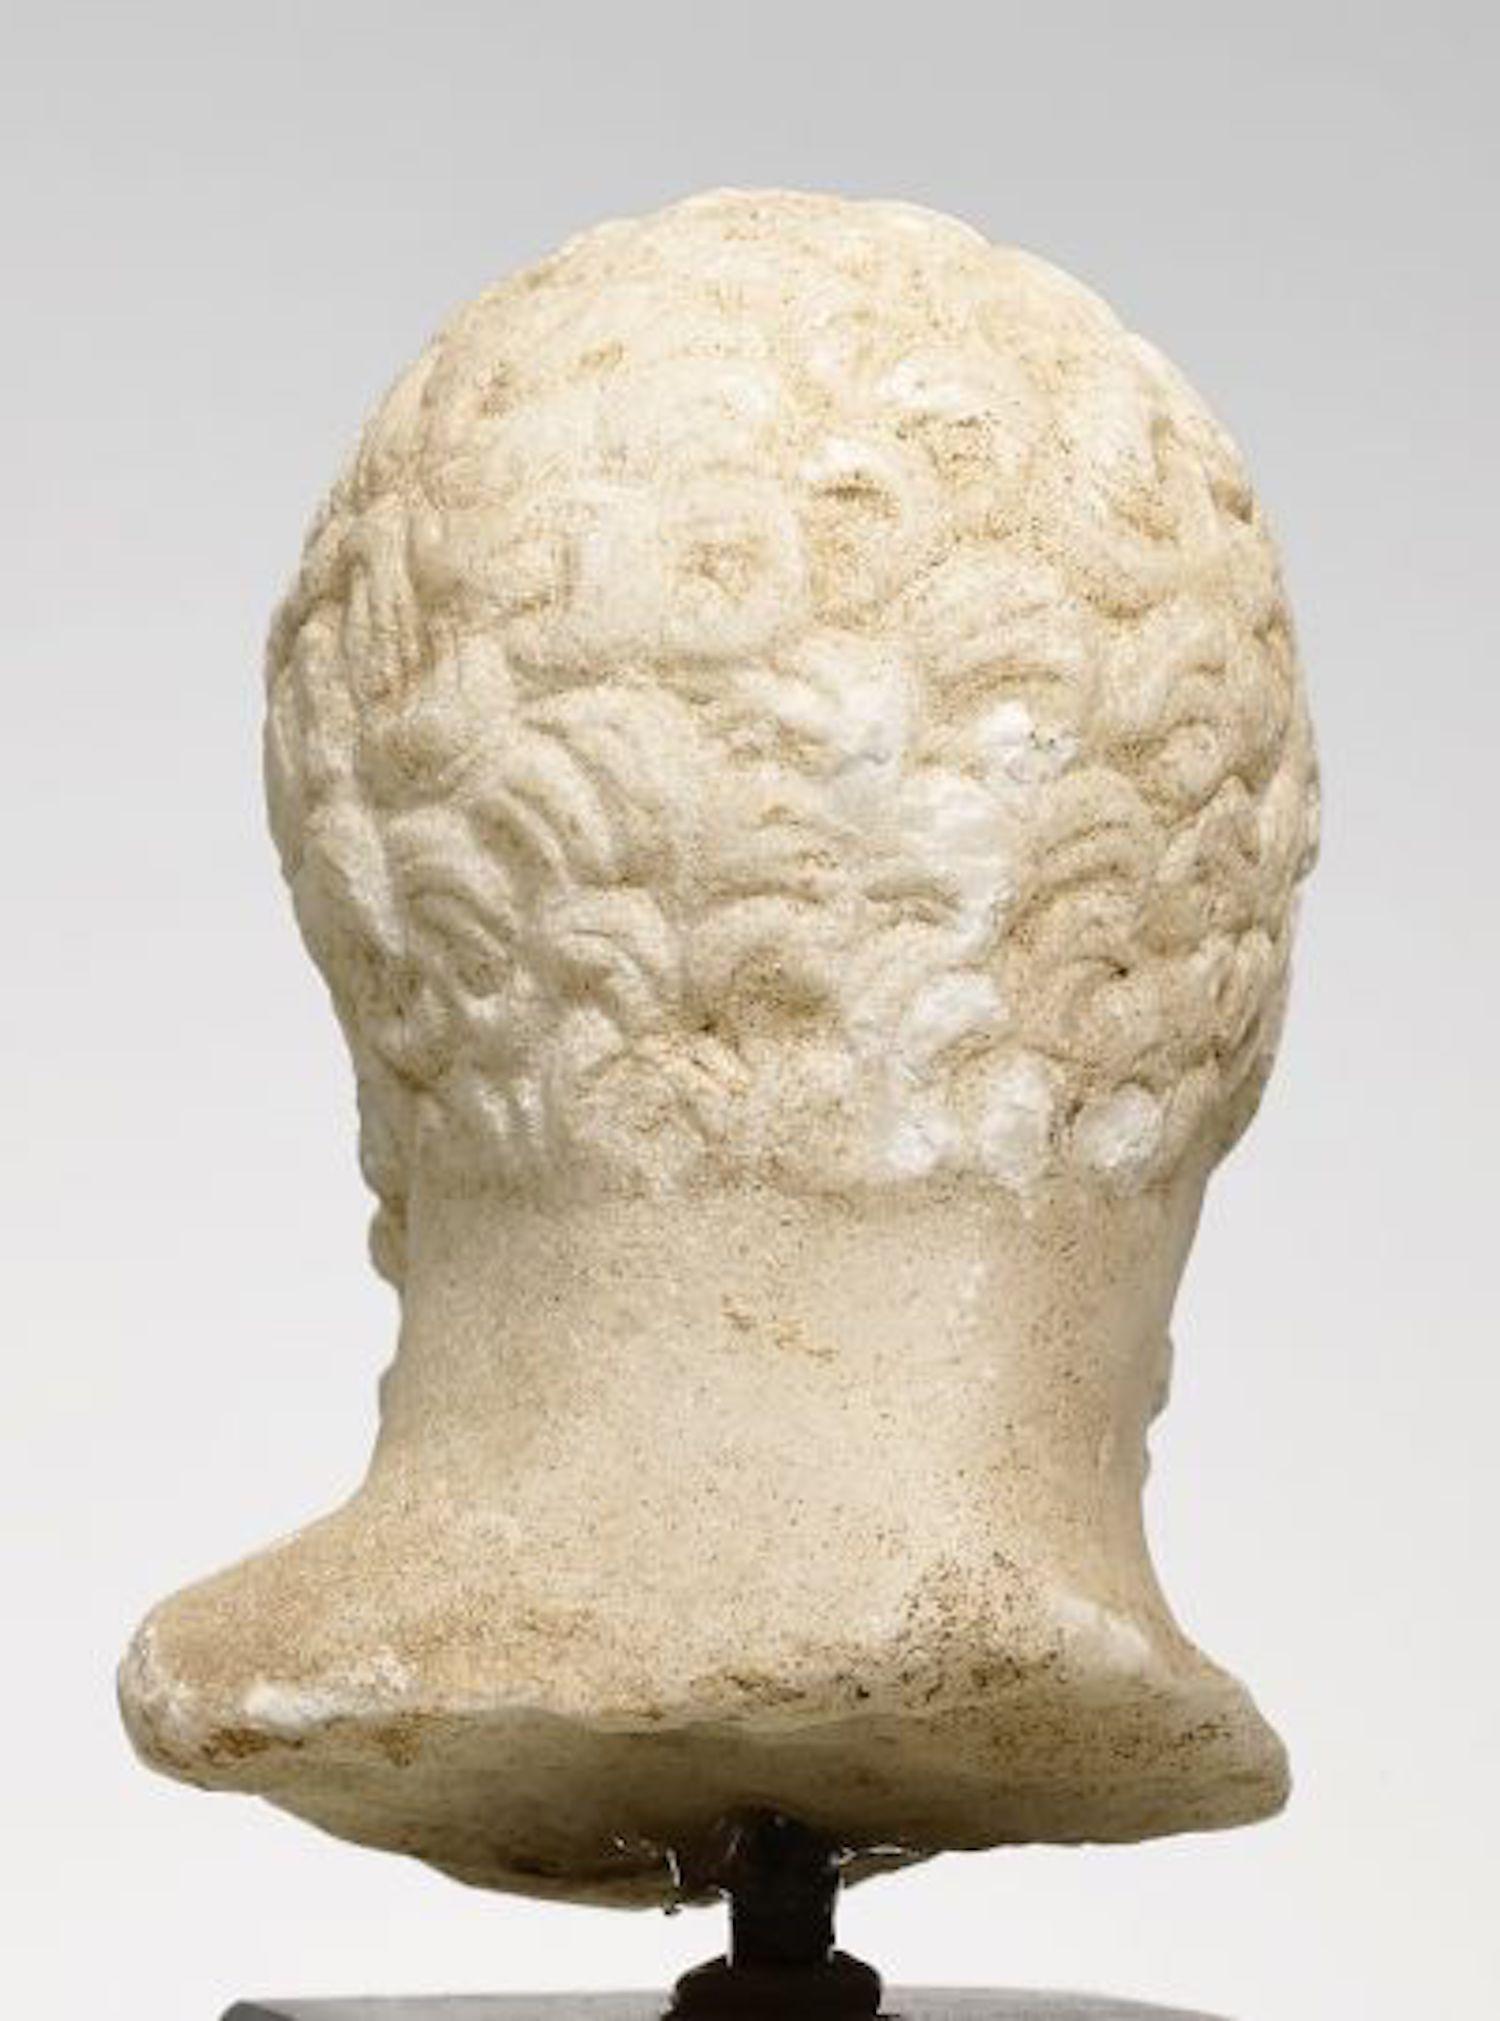 Hellenistic, ca. 2nd/1st century BC
Fine white crystalline marble.
H. 6,5 cm.

A small head of a marble figurine of the „Herakles Farnese“ type.
The hero’s head is slightly turned downwards, wearing a long wooly beard and short curly hair. A typical